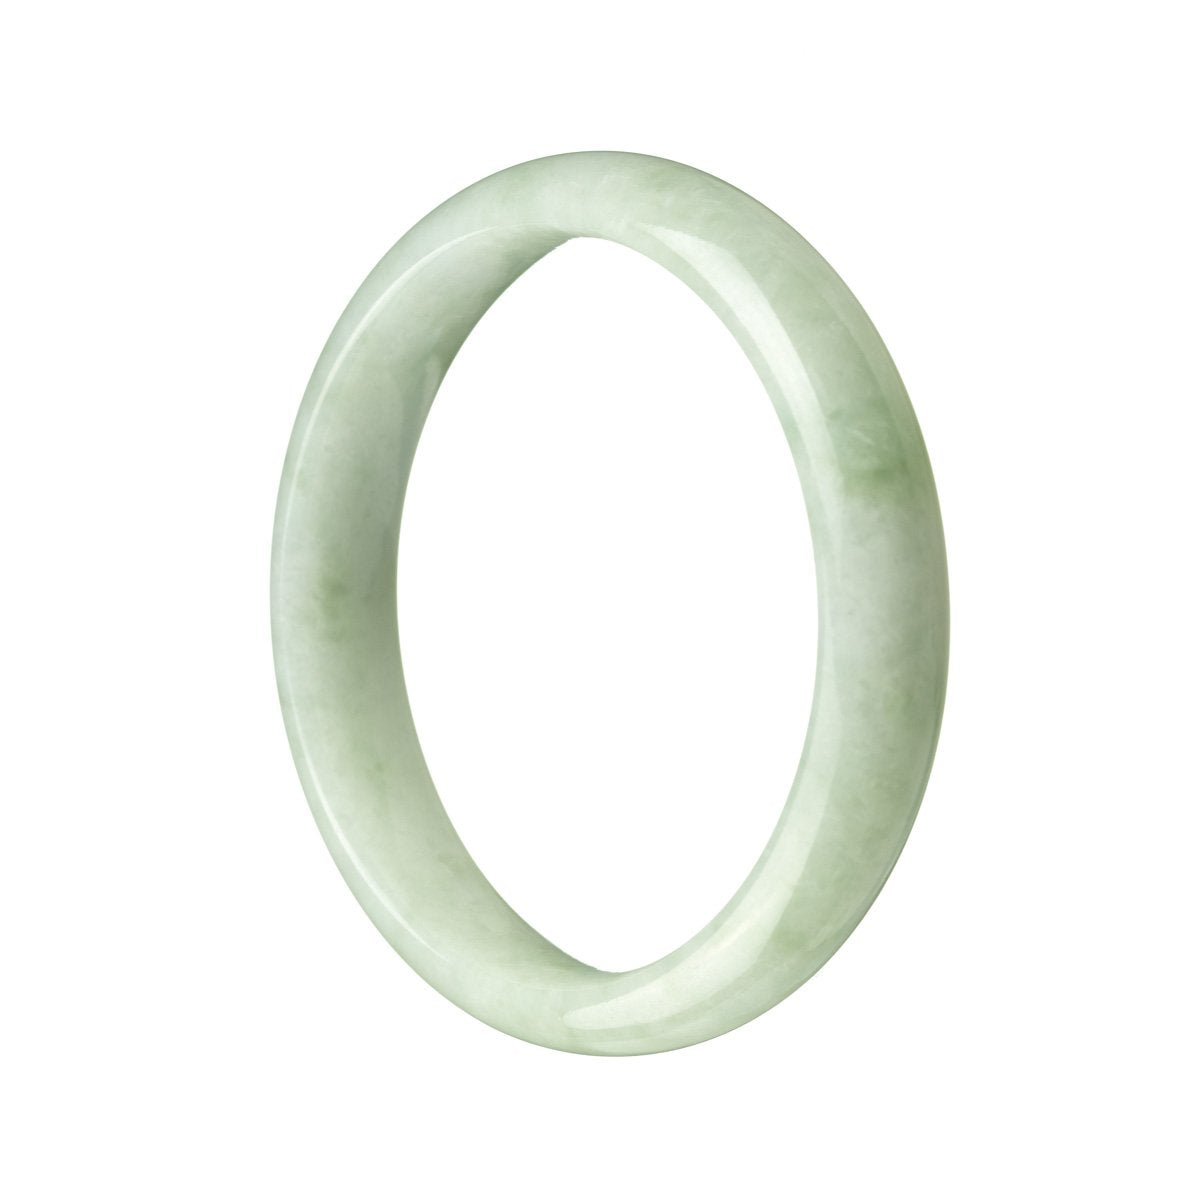 A light green traditional jade bangle with a half moon shape, made from high-quality grade A jade.